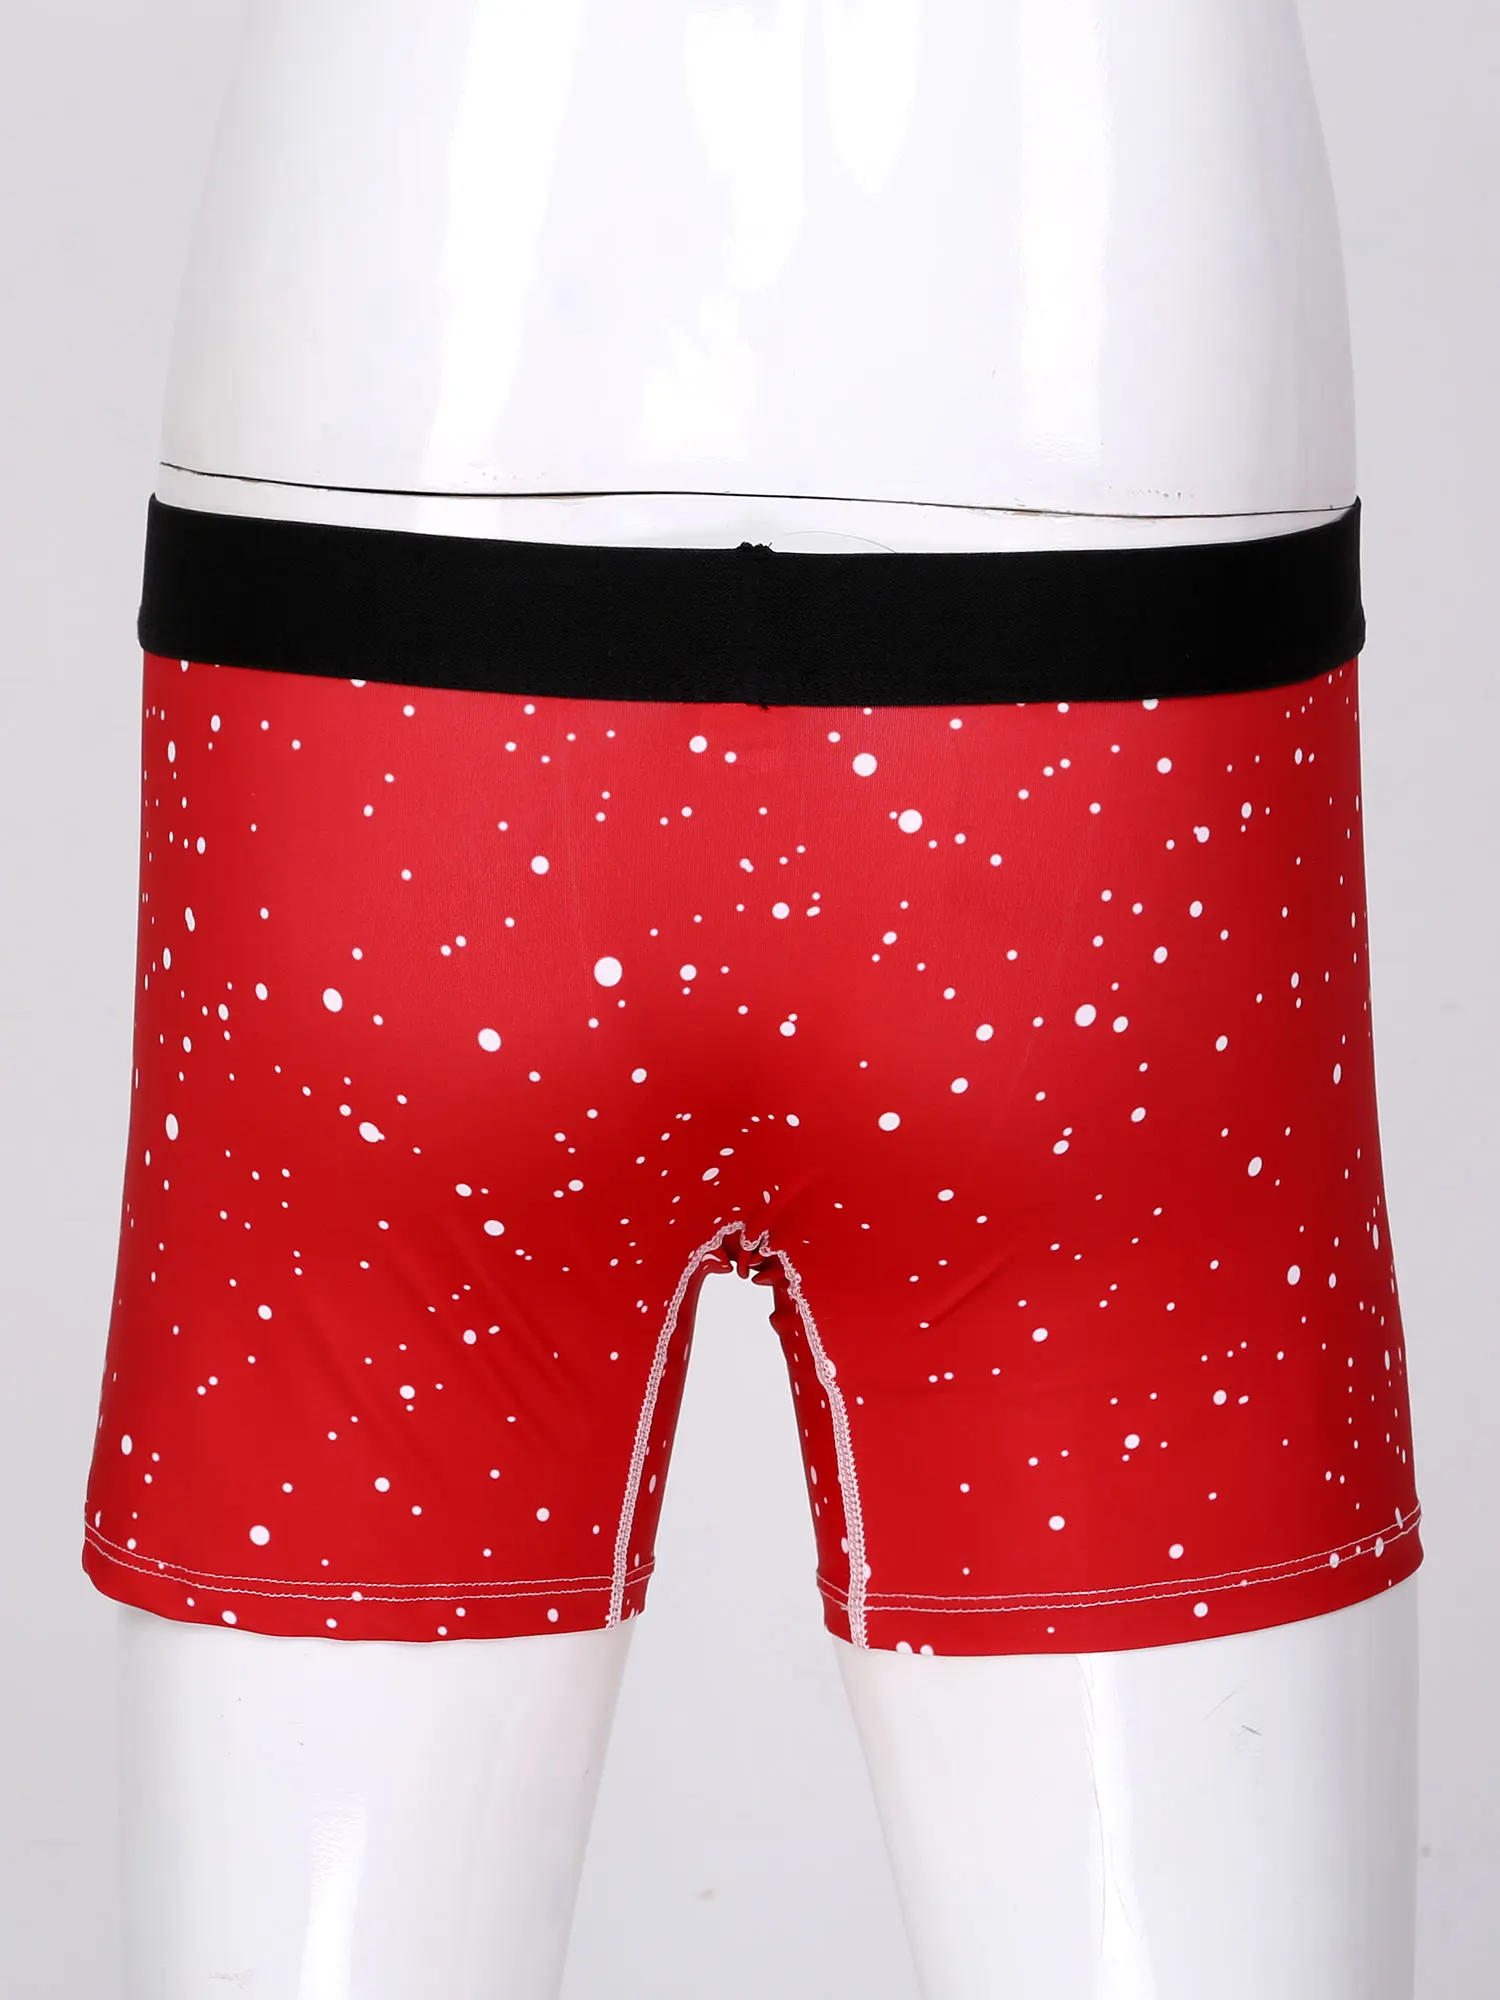 Sexy Christmas Printed Boxer Shorts for Mens Jockstraps Bulge Pouch Fancy Underwear Underpants Lingerie Christmas Hot Shorts socks and tights